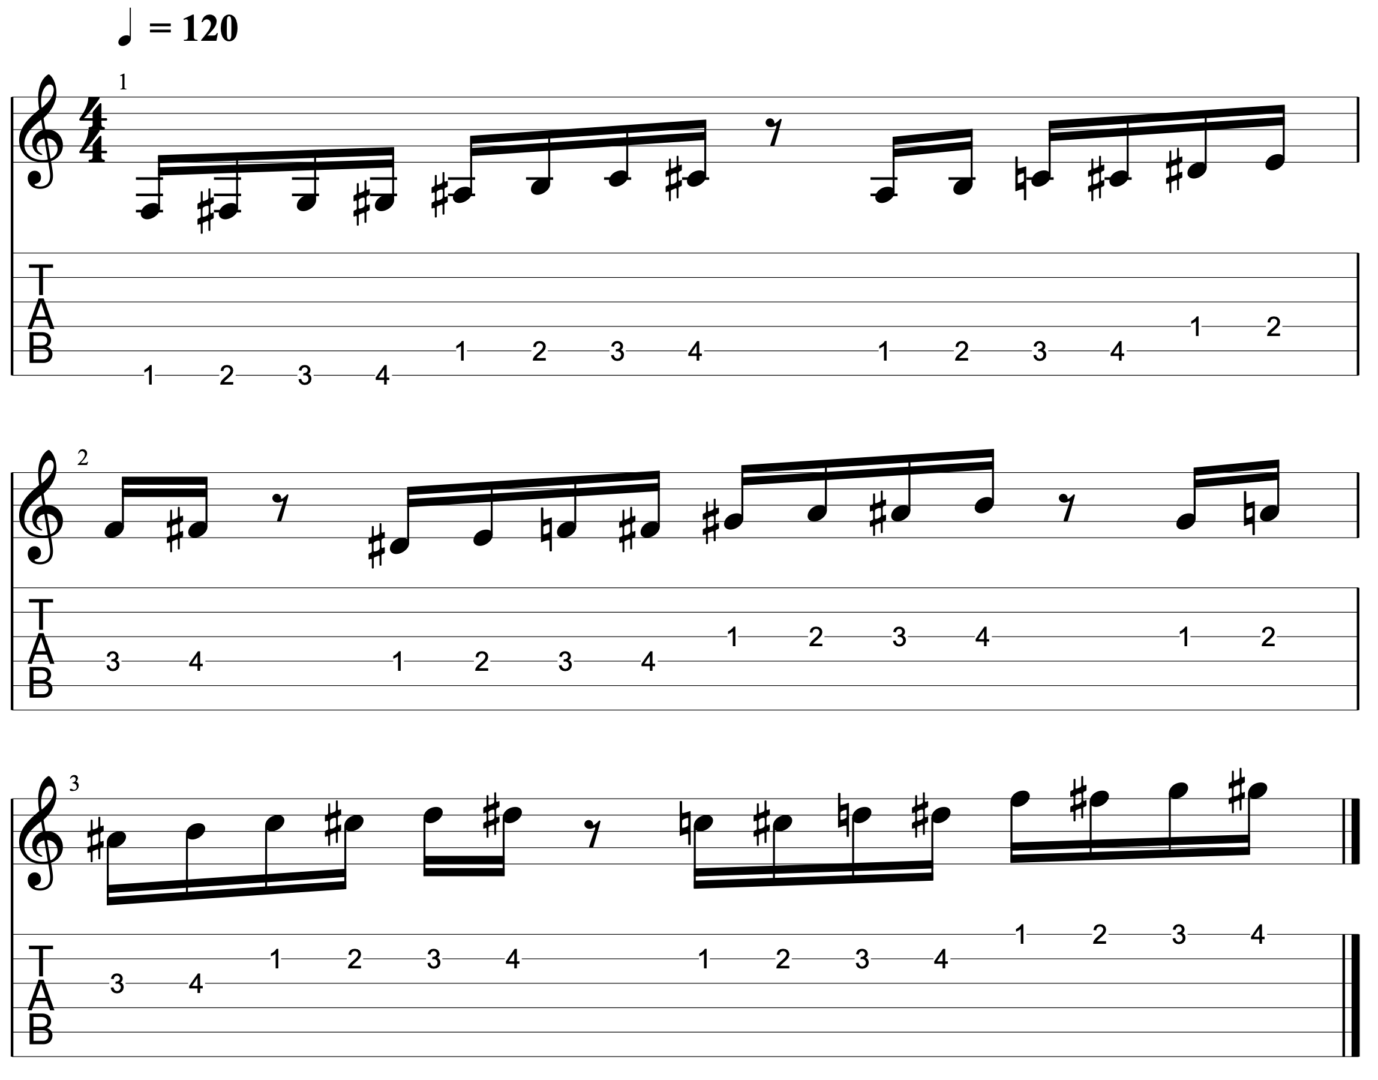 'Bursting' is one of the best guitar exercises to help you build speed